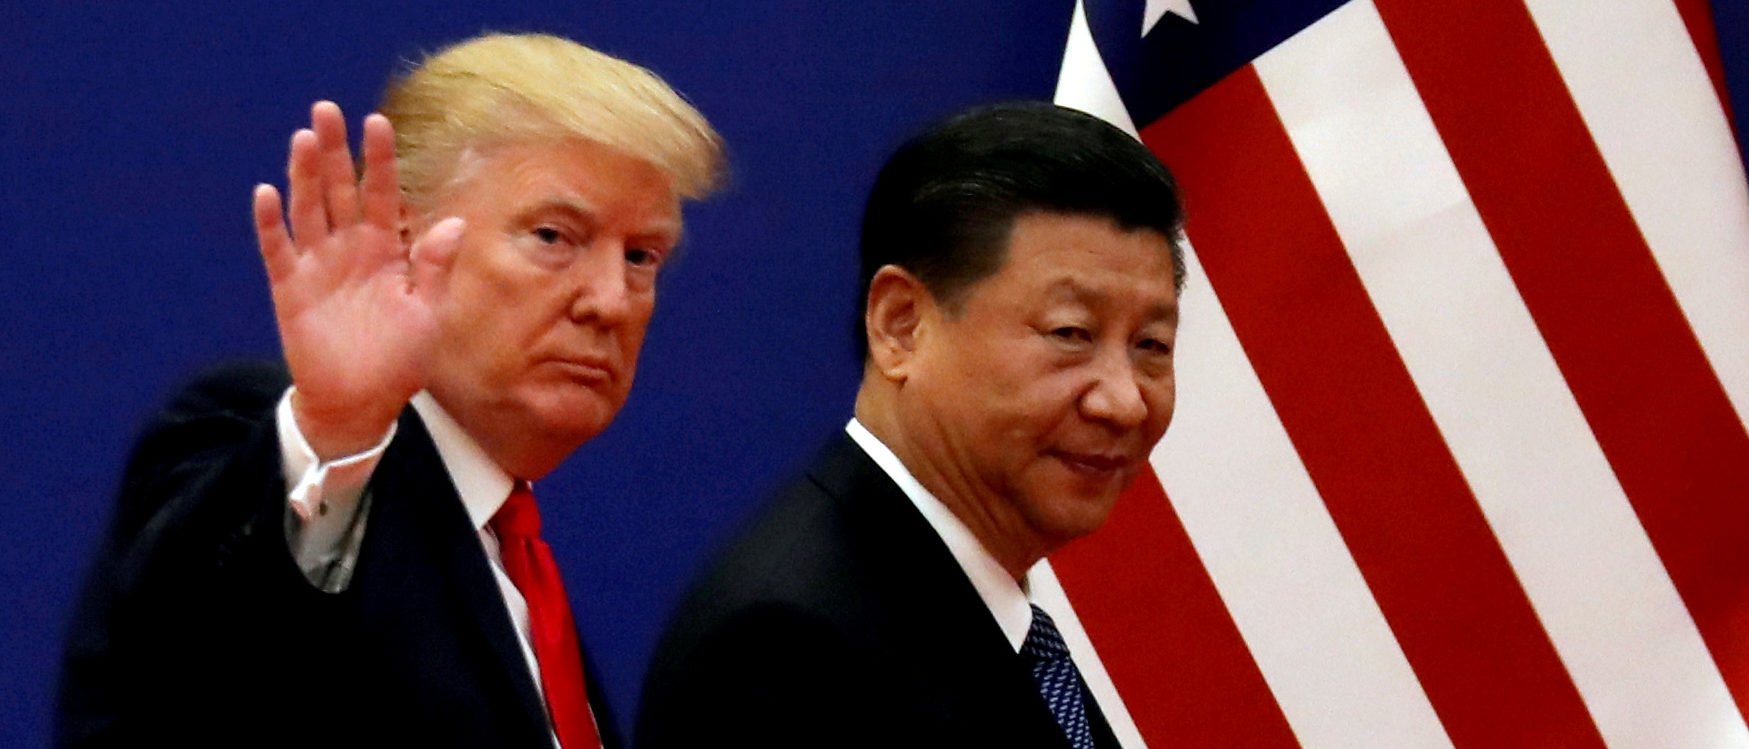 U.S. President Donald Trump and China's President Xi Jinping meet business leaders at the Great Hall of the People in Beijing